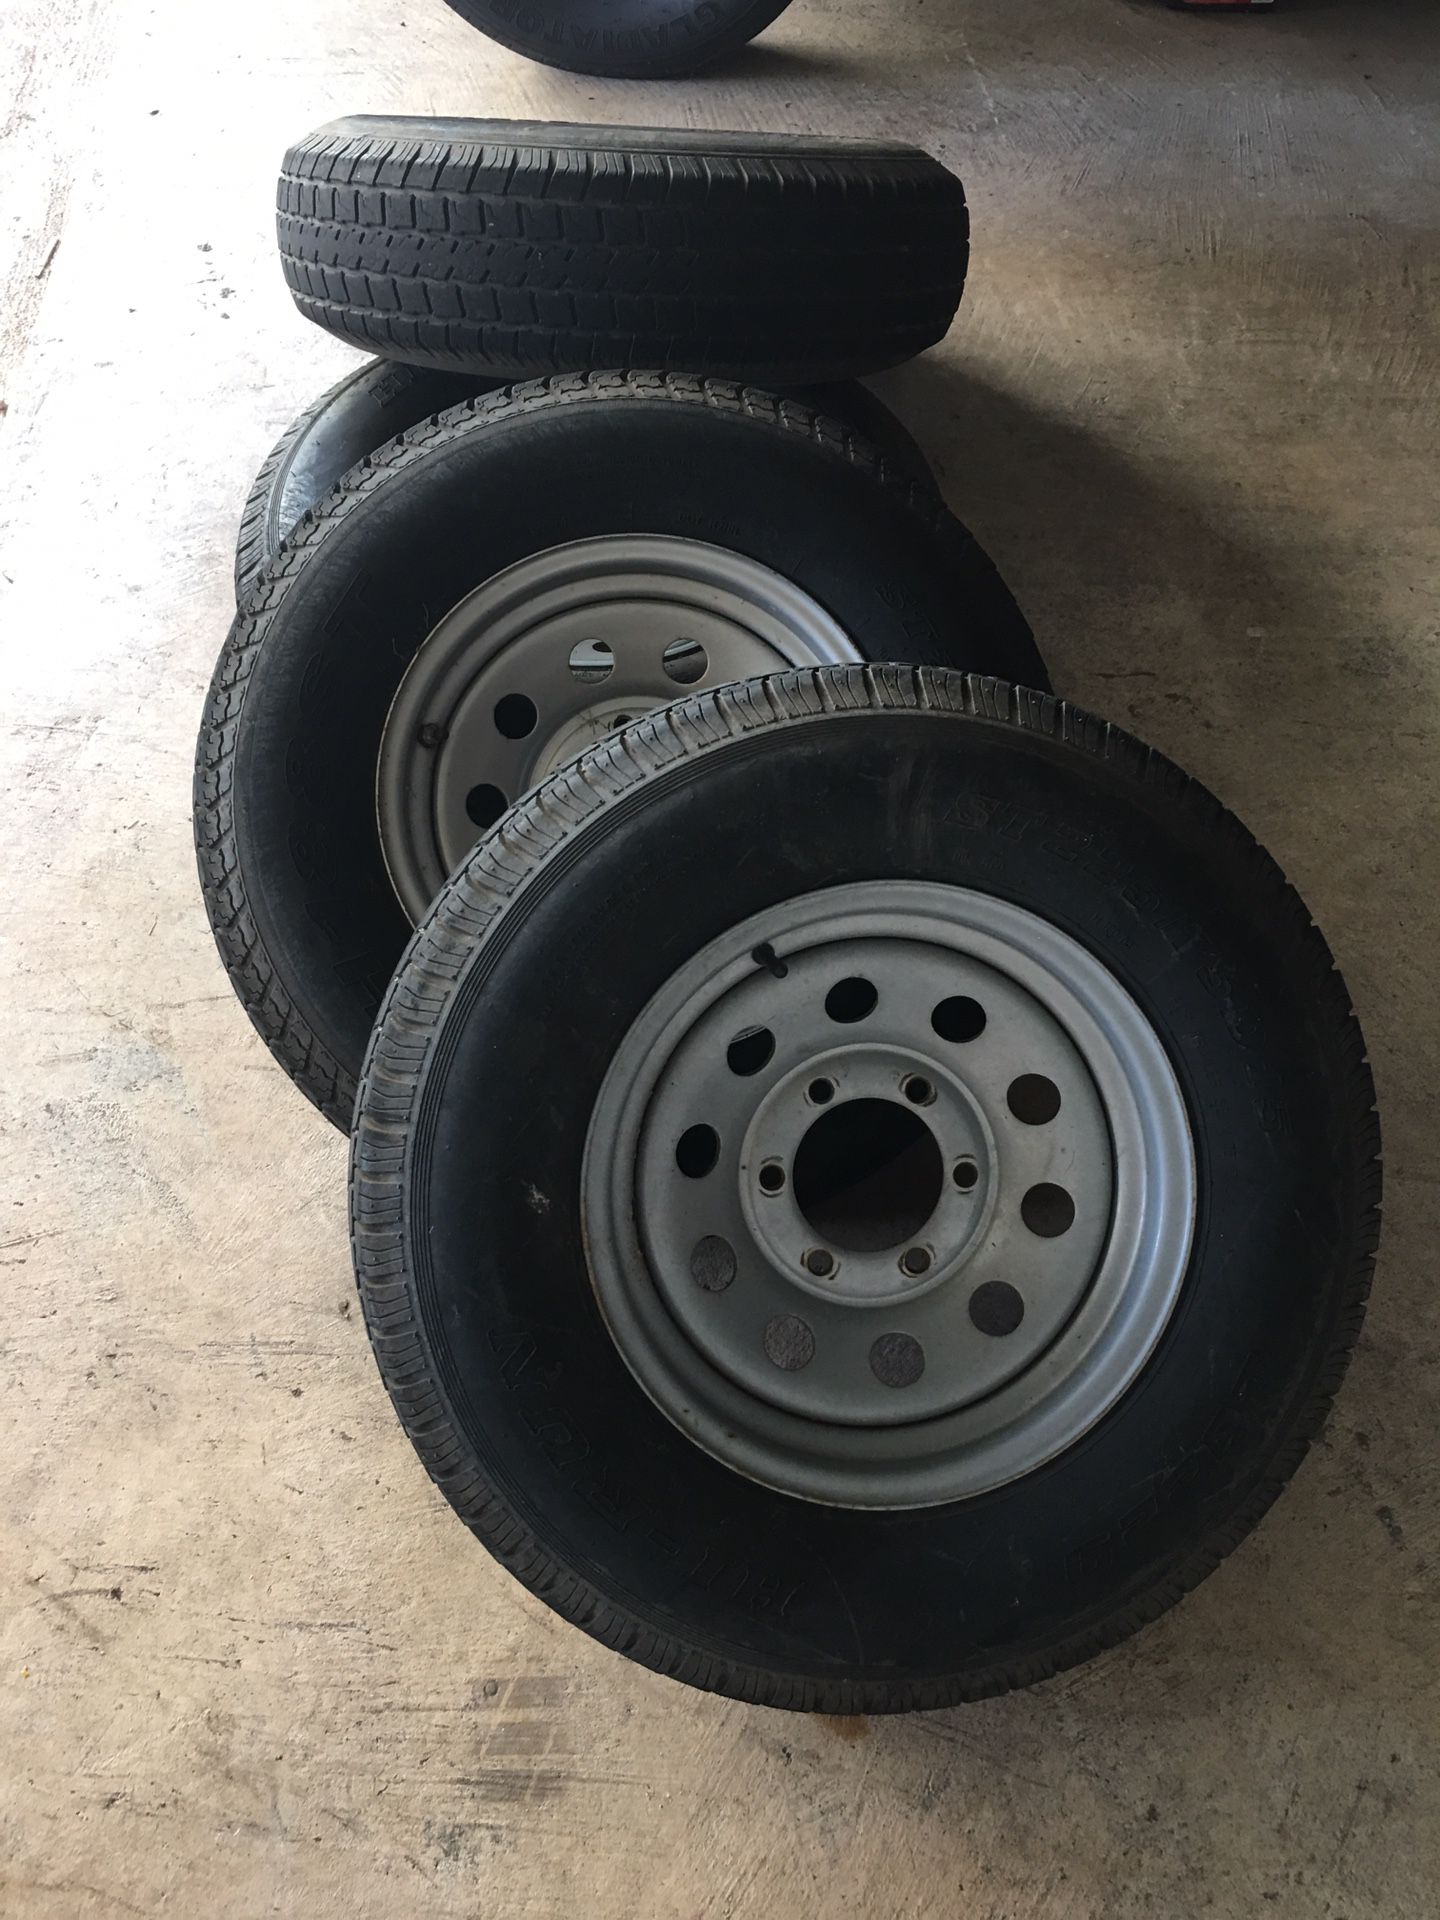 Trailer wheels and tires 15”